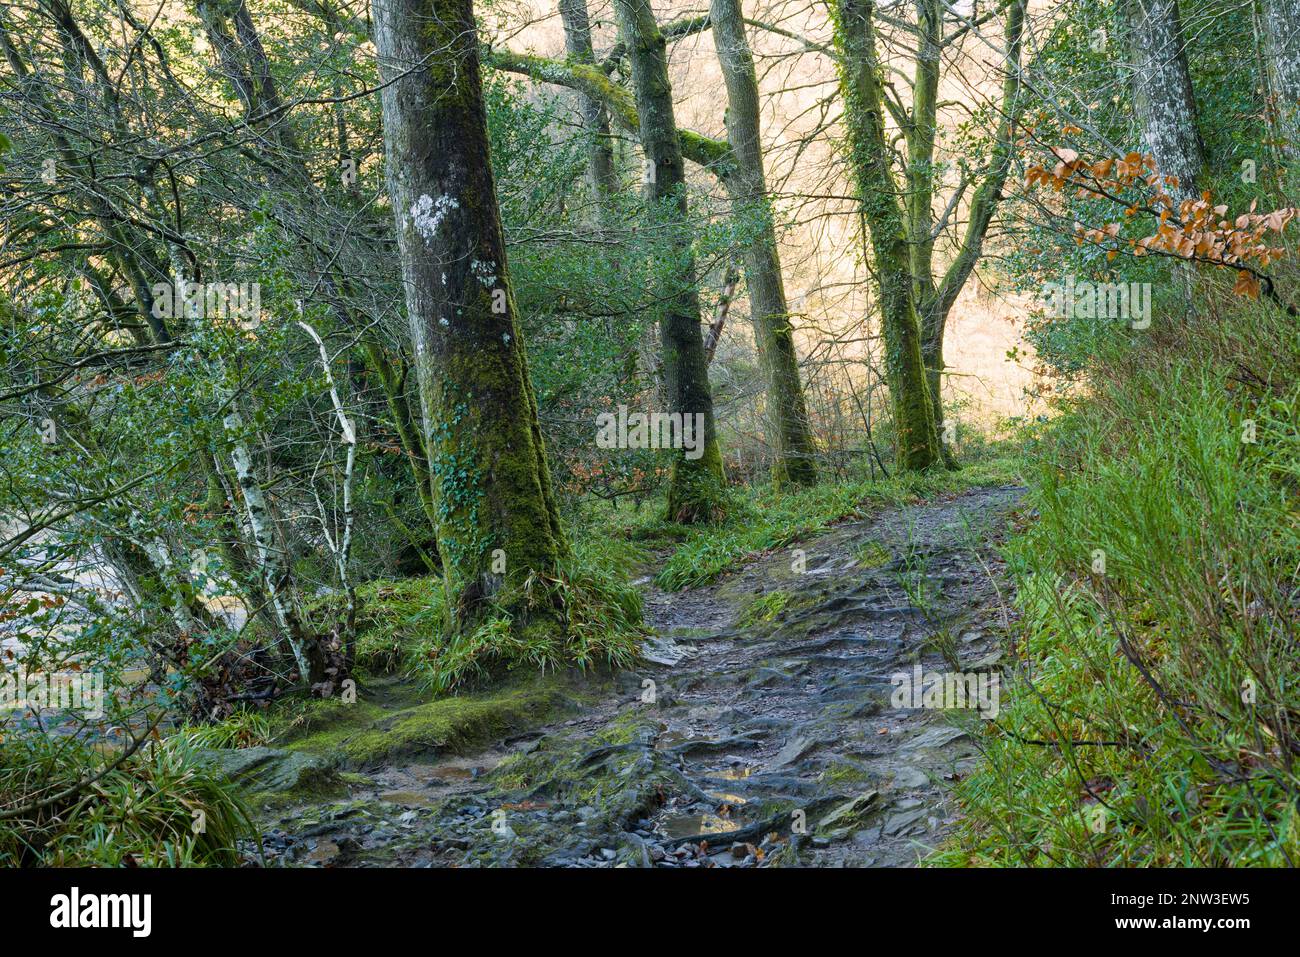 The footpath on the bank of the River Barle in Burridge Woods near Dulverton in the Exmoor National Park, Somerset, England. Stock Photo